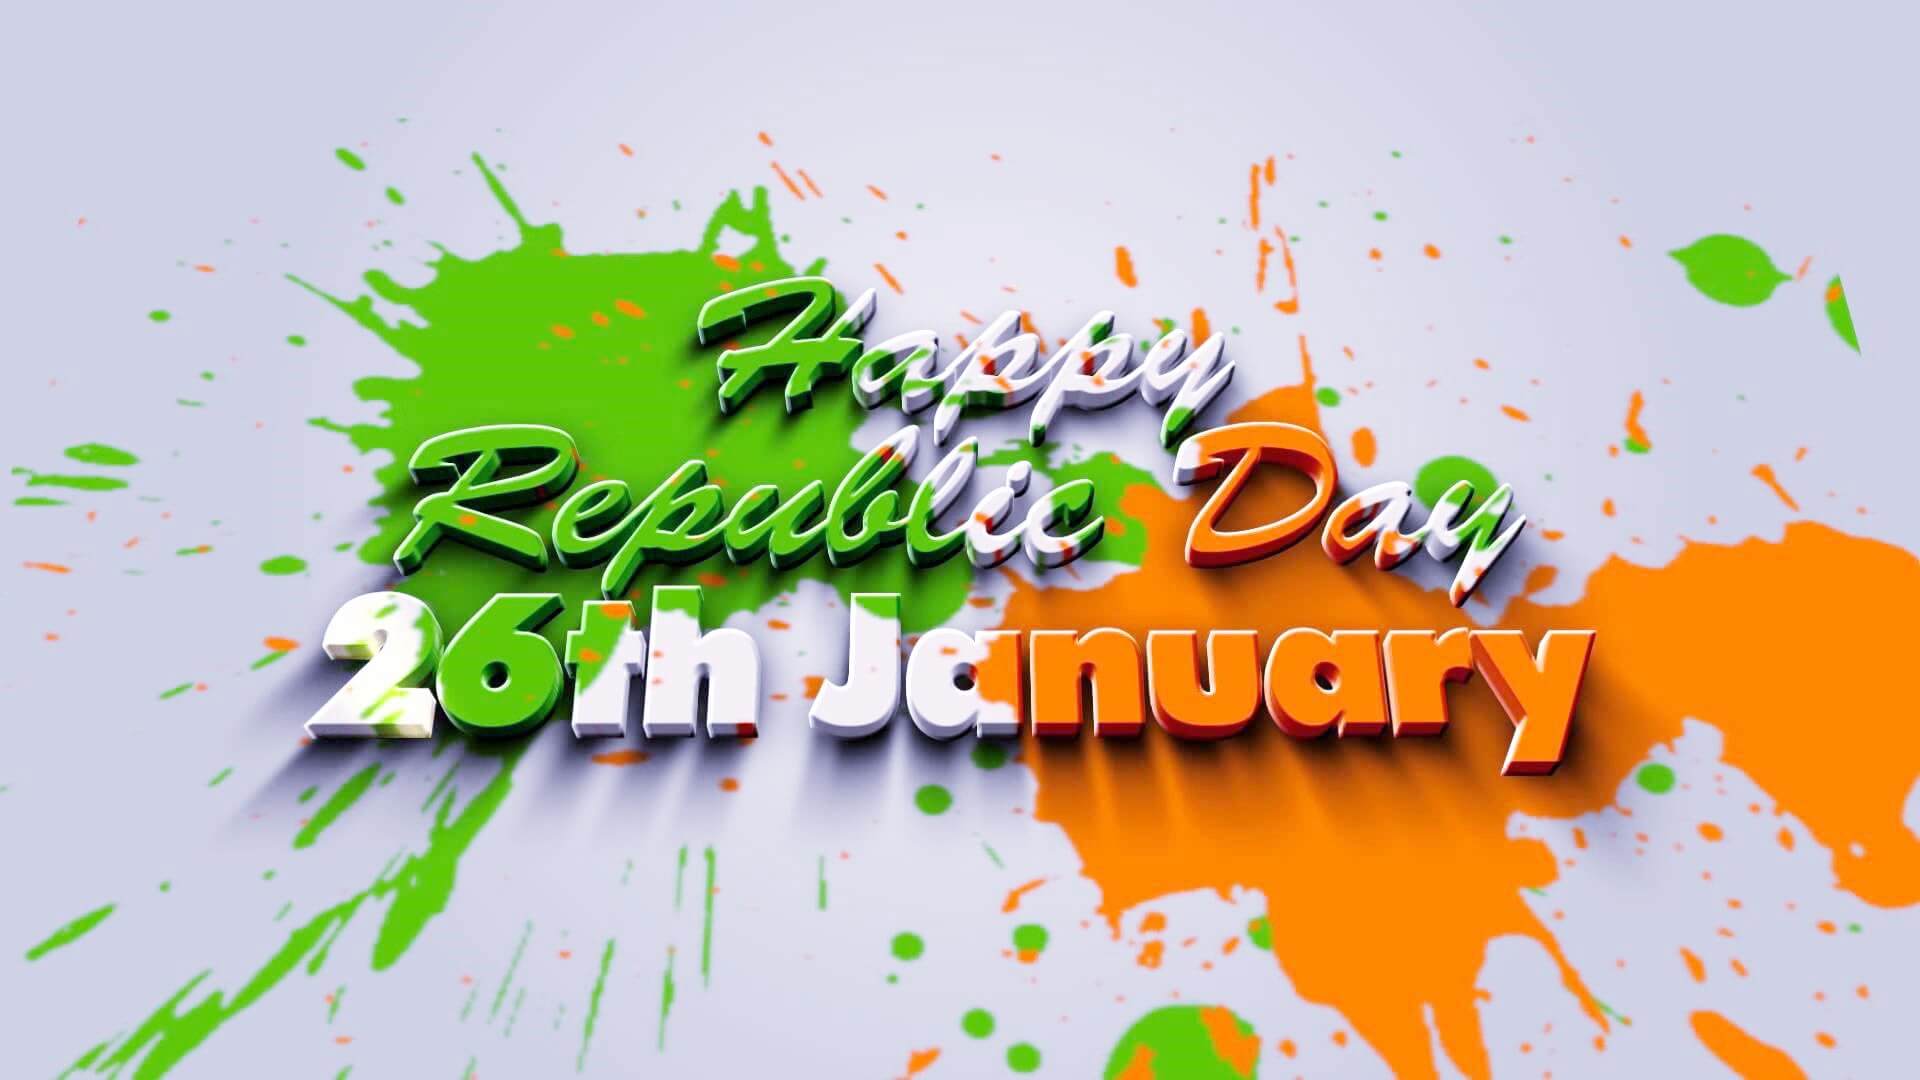 Happy Republic Day India Colorful Greetings 26th January HD Wallpaper